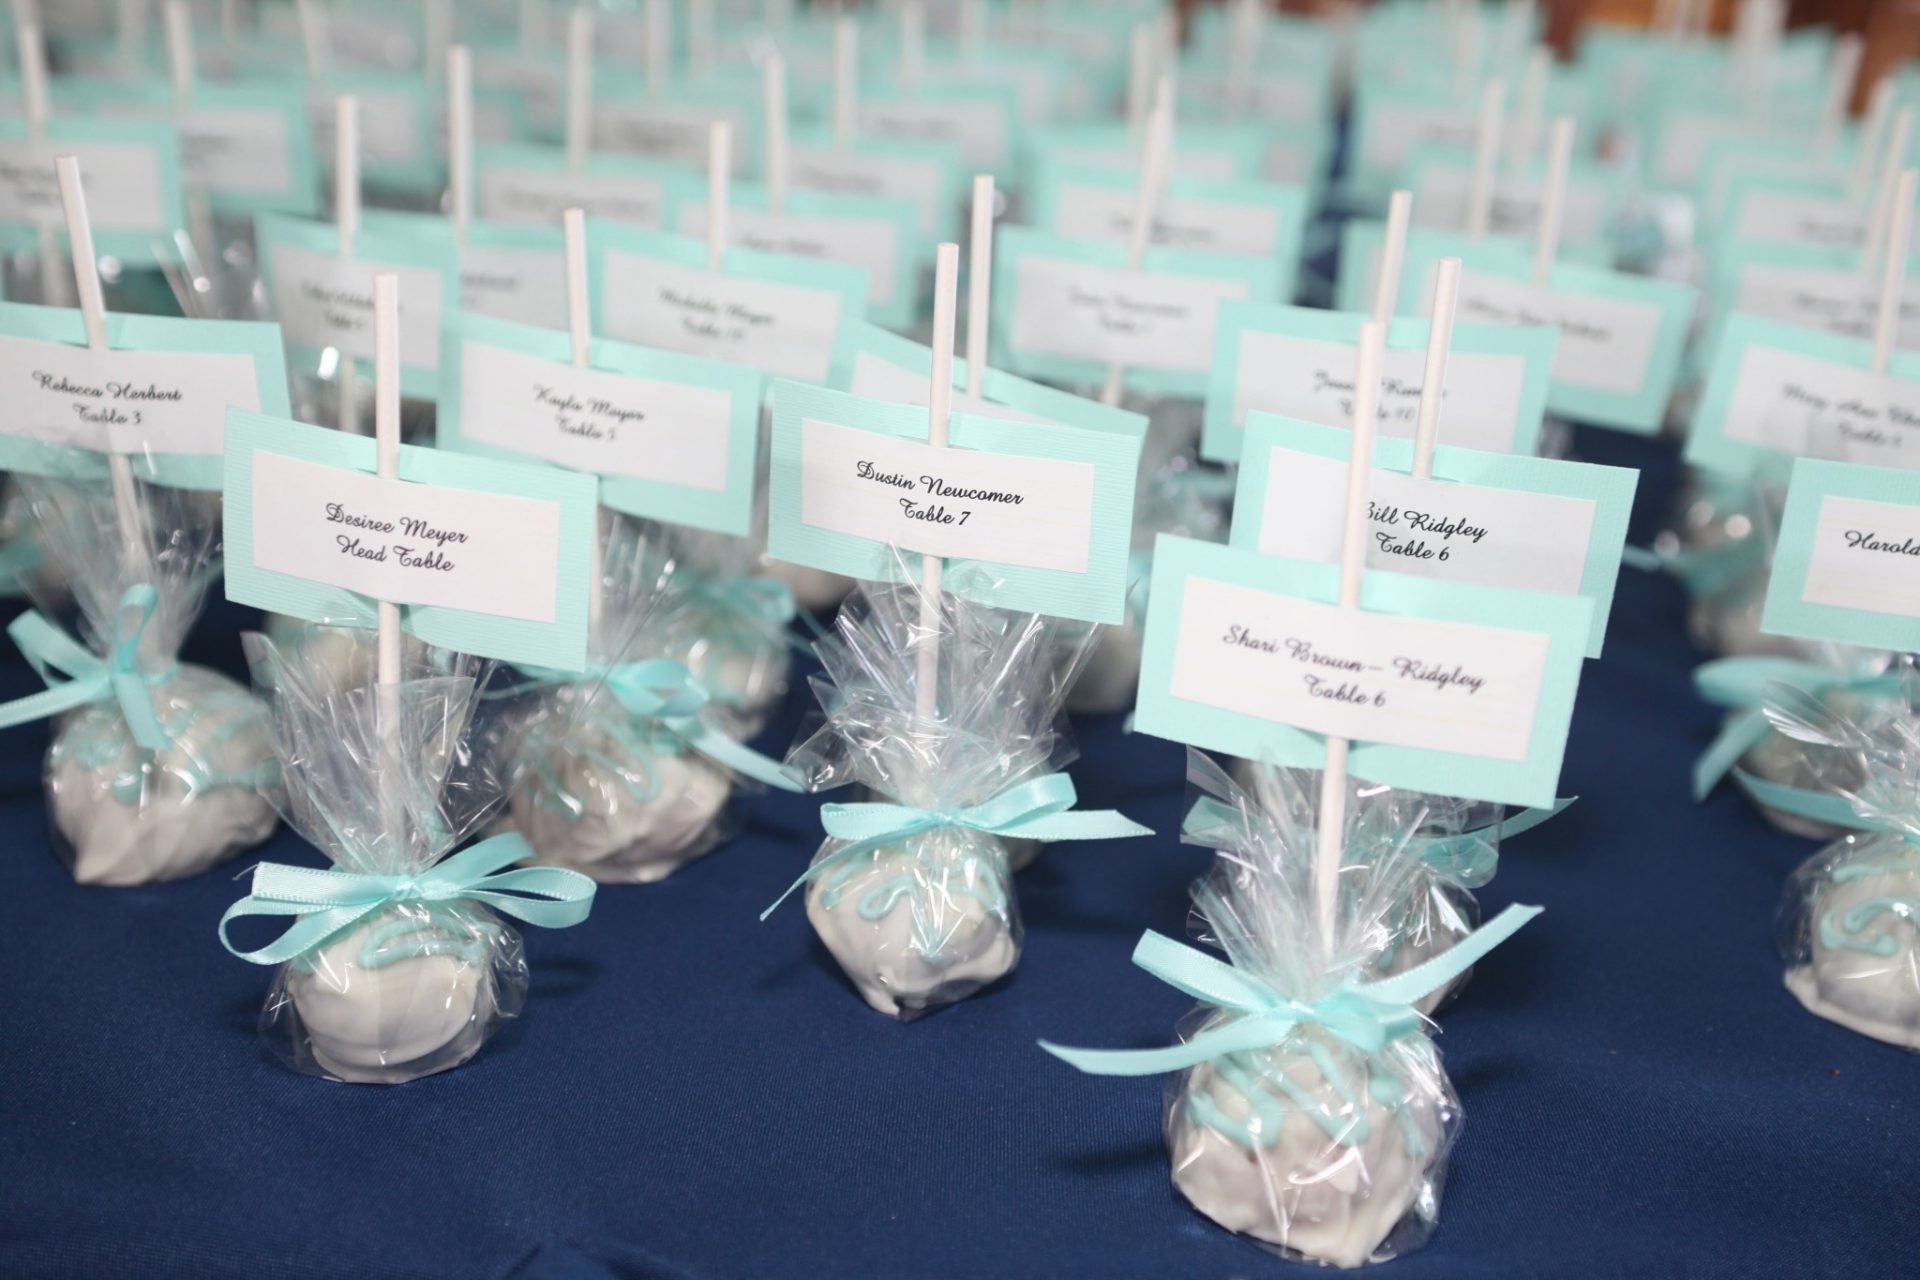 Cake pop party favors wrapped in plastic with teal bow also used as table assignments